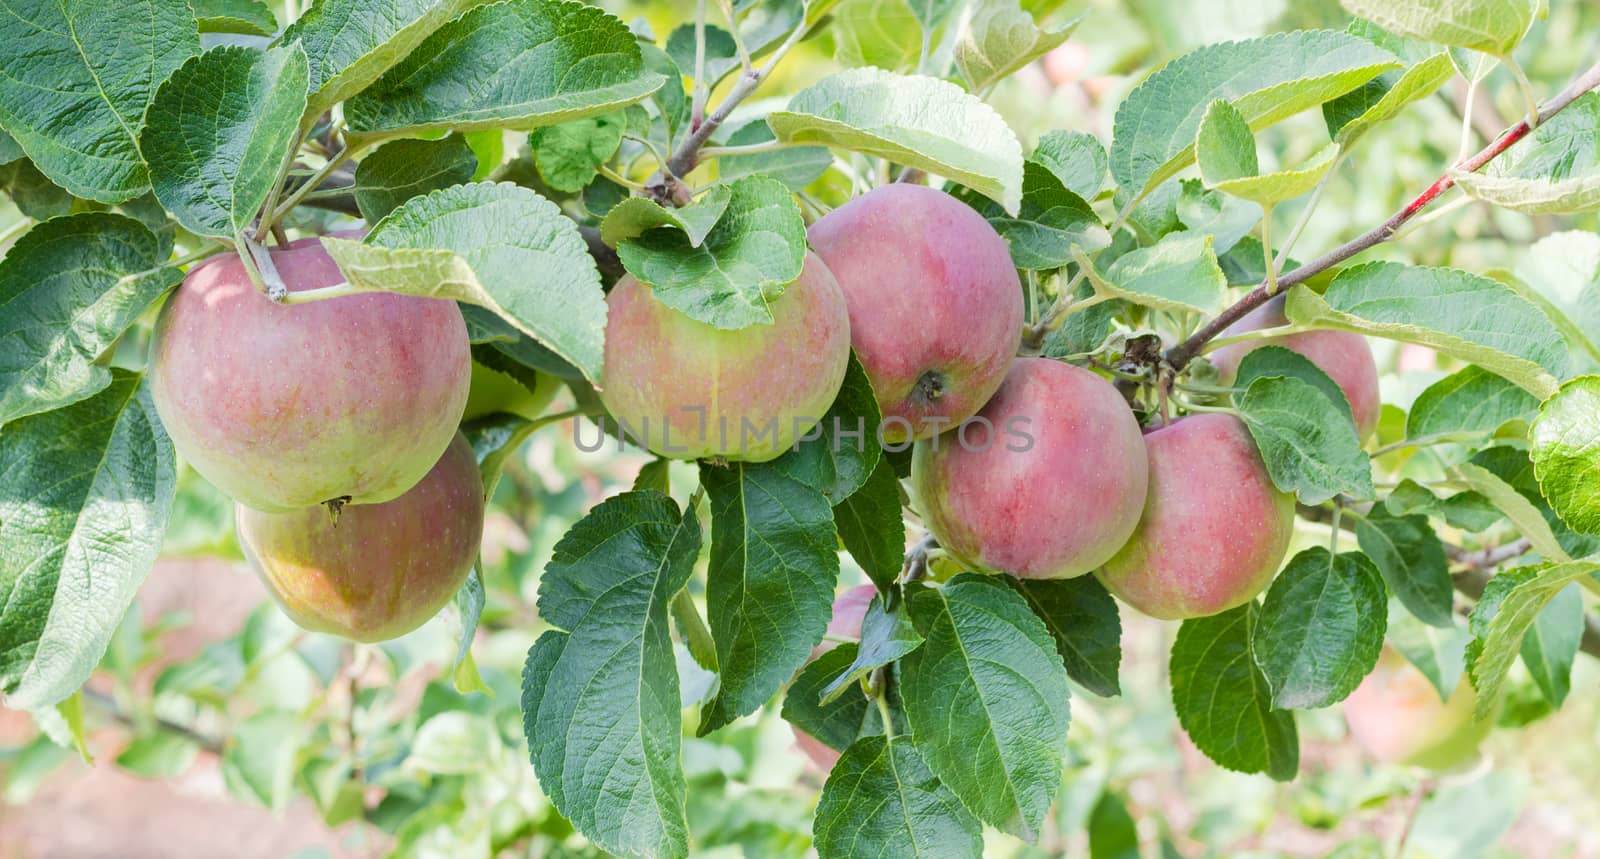 Panorama of the branch of an apple tree with several ripe green and red apples and leaves in a orchard closeup
